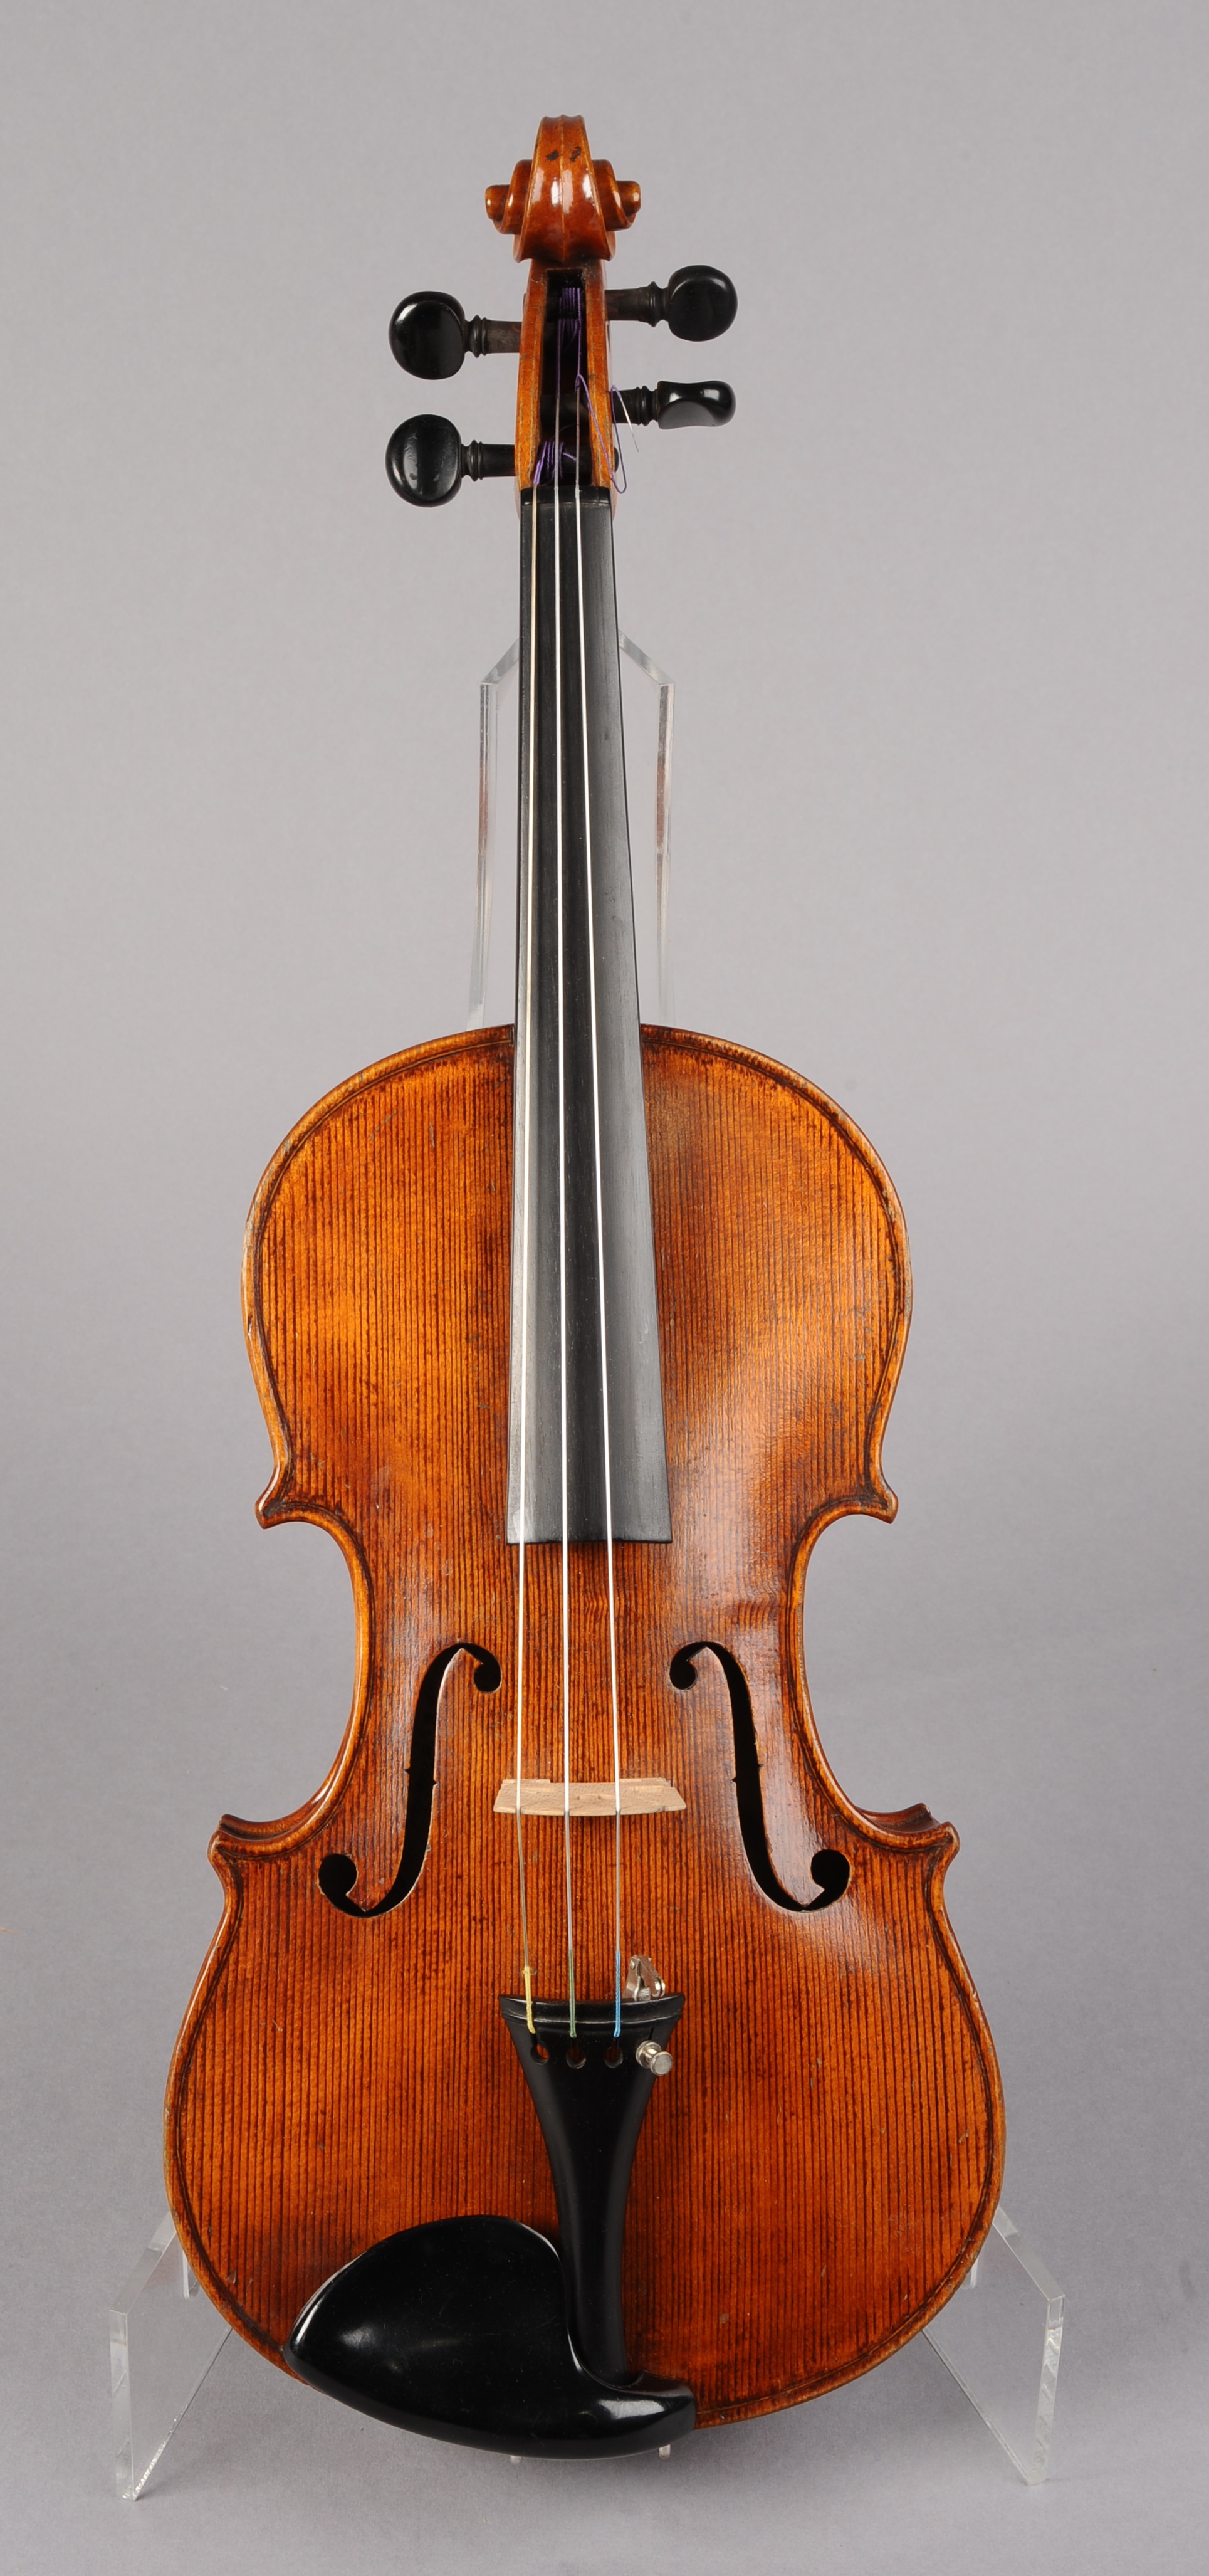 A VIOLIN, bearing label Carlo Storioni and dated 1845, with two-part back, measuring 35.5cm below